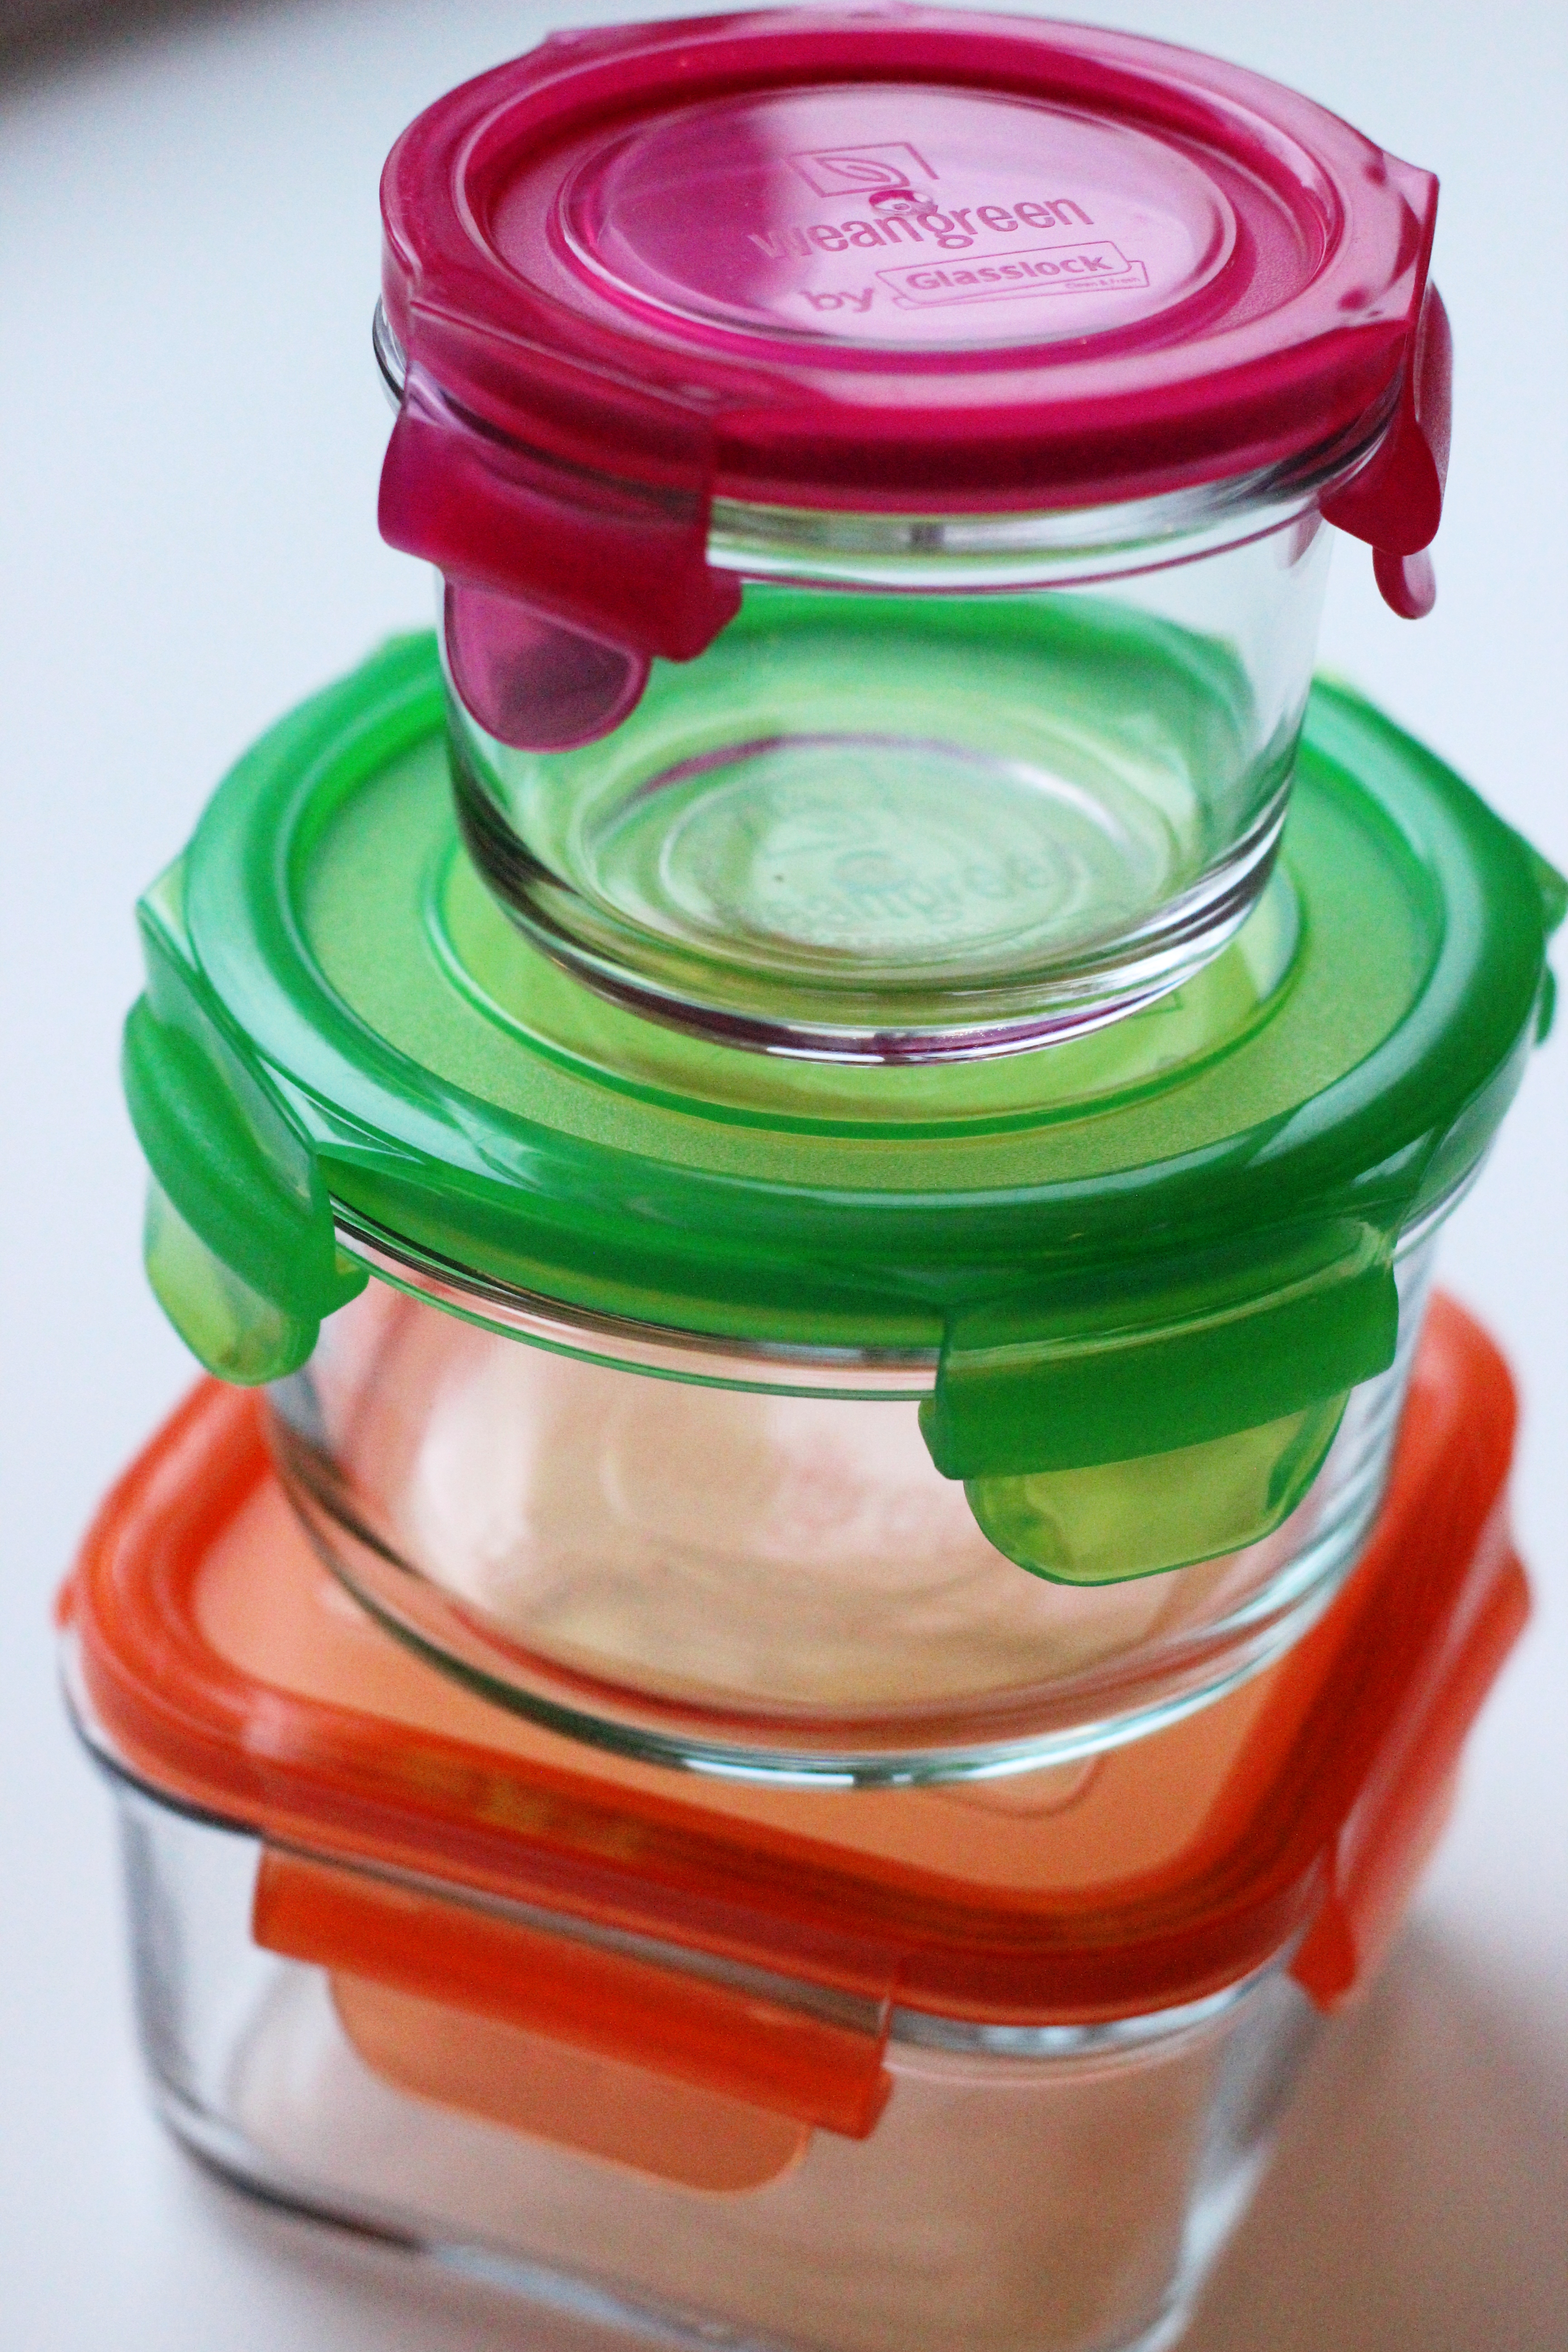 Pyrex Round Storage Containers Review